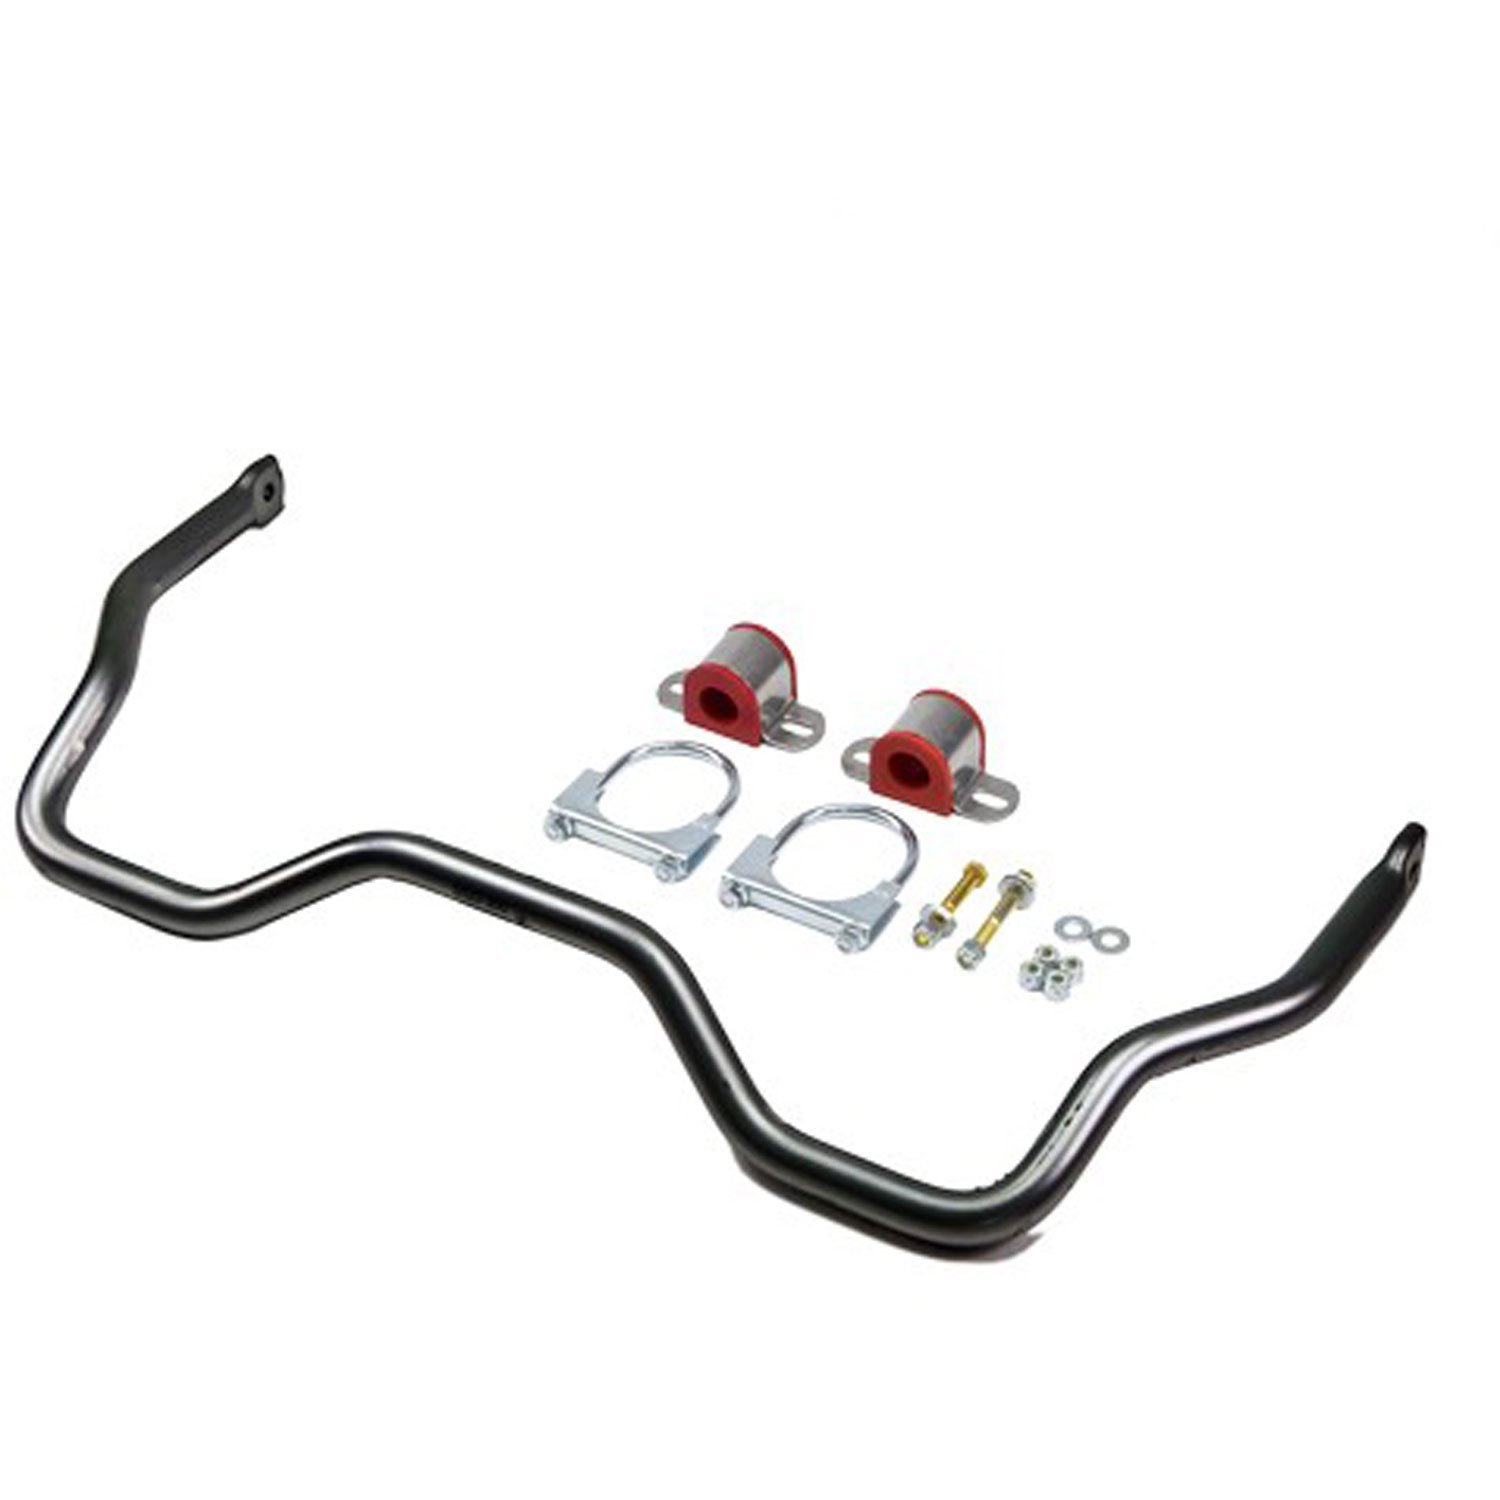 Front Sway Bar Kit for 1995-2003 Chevy Blazer/GMC